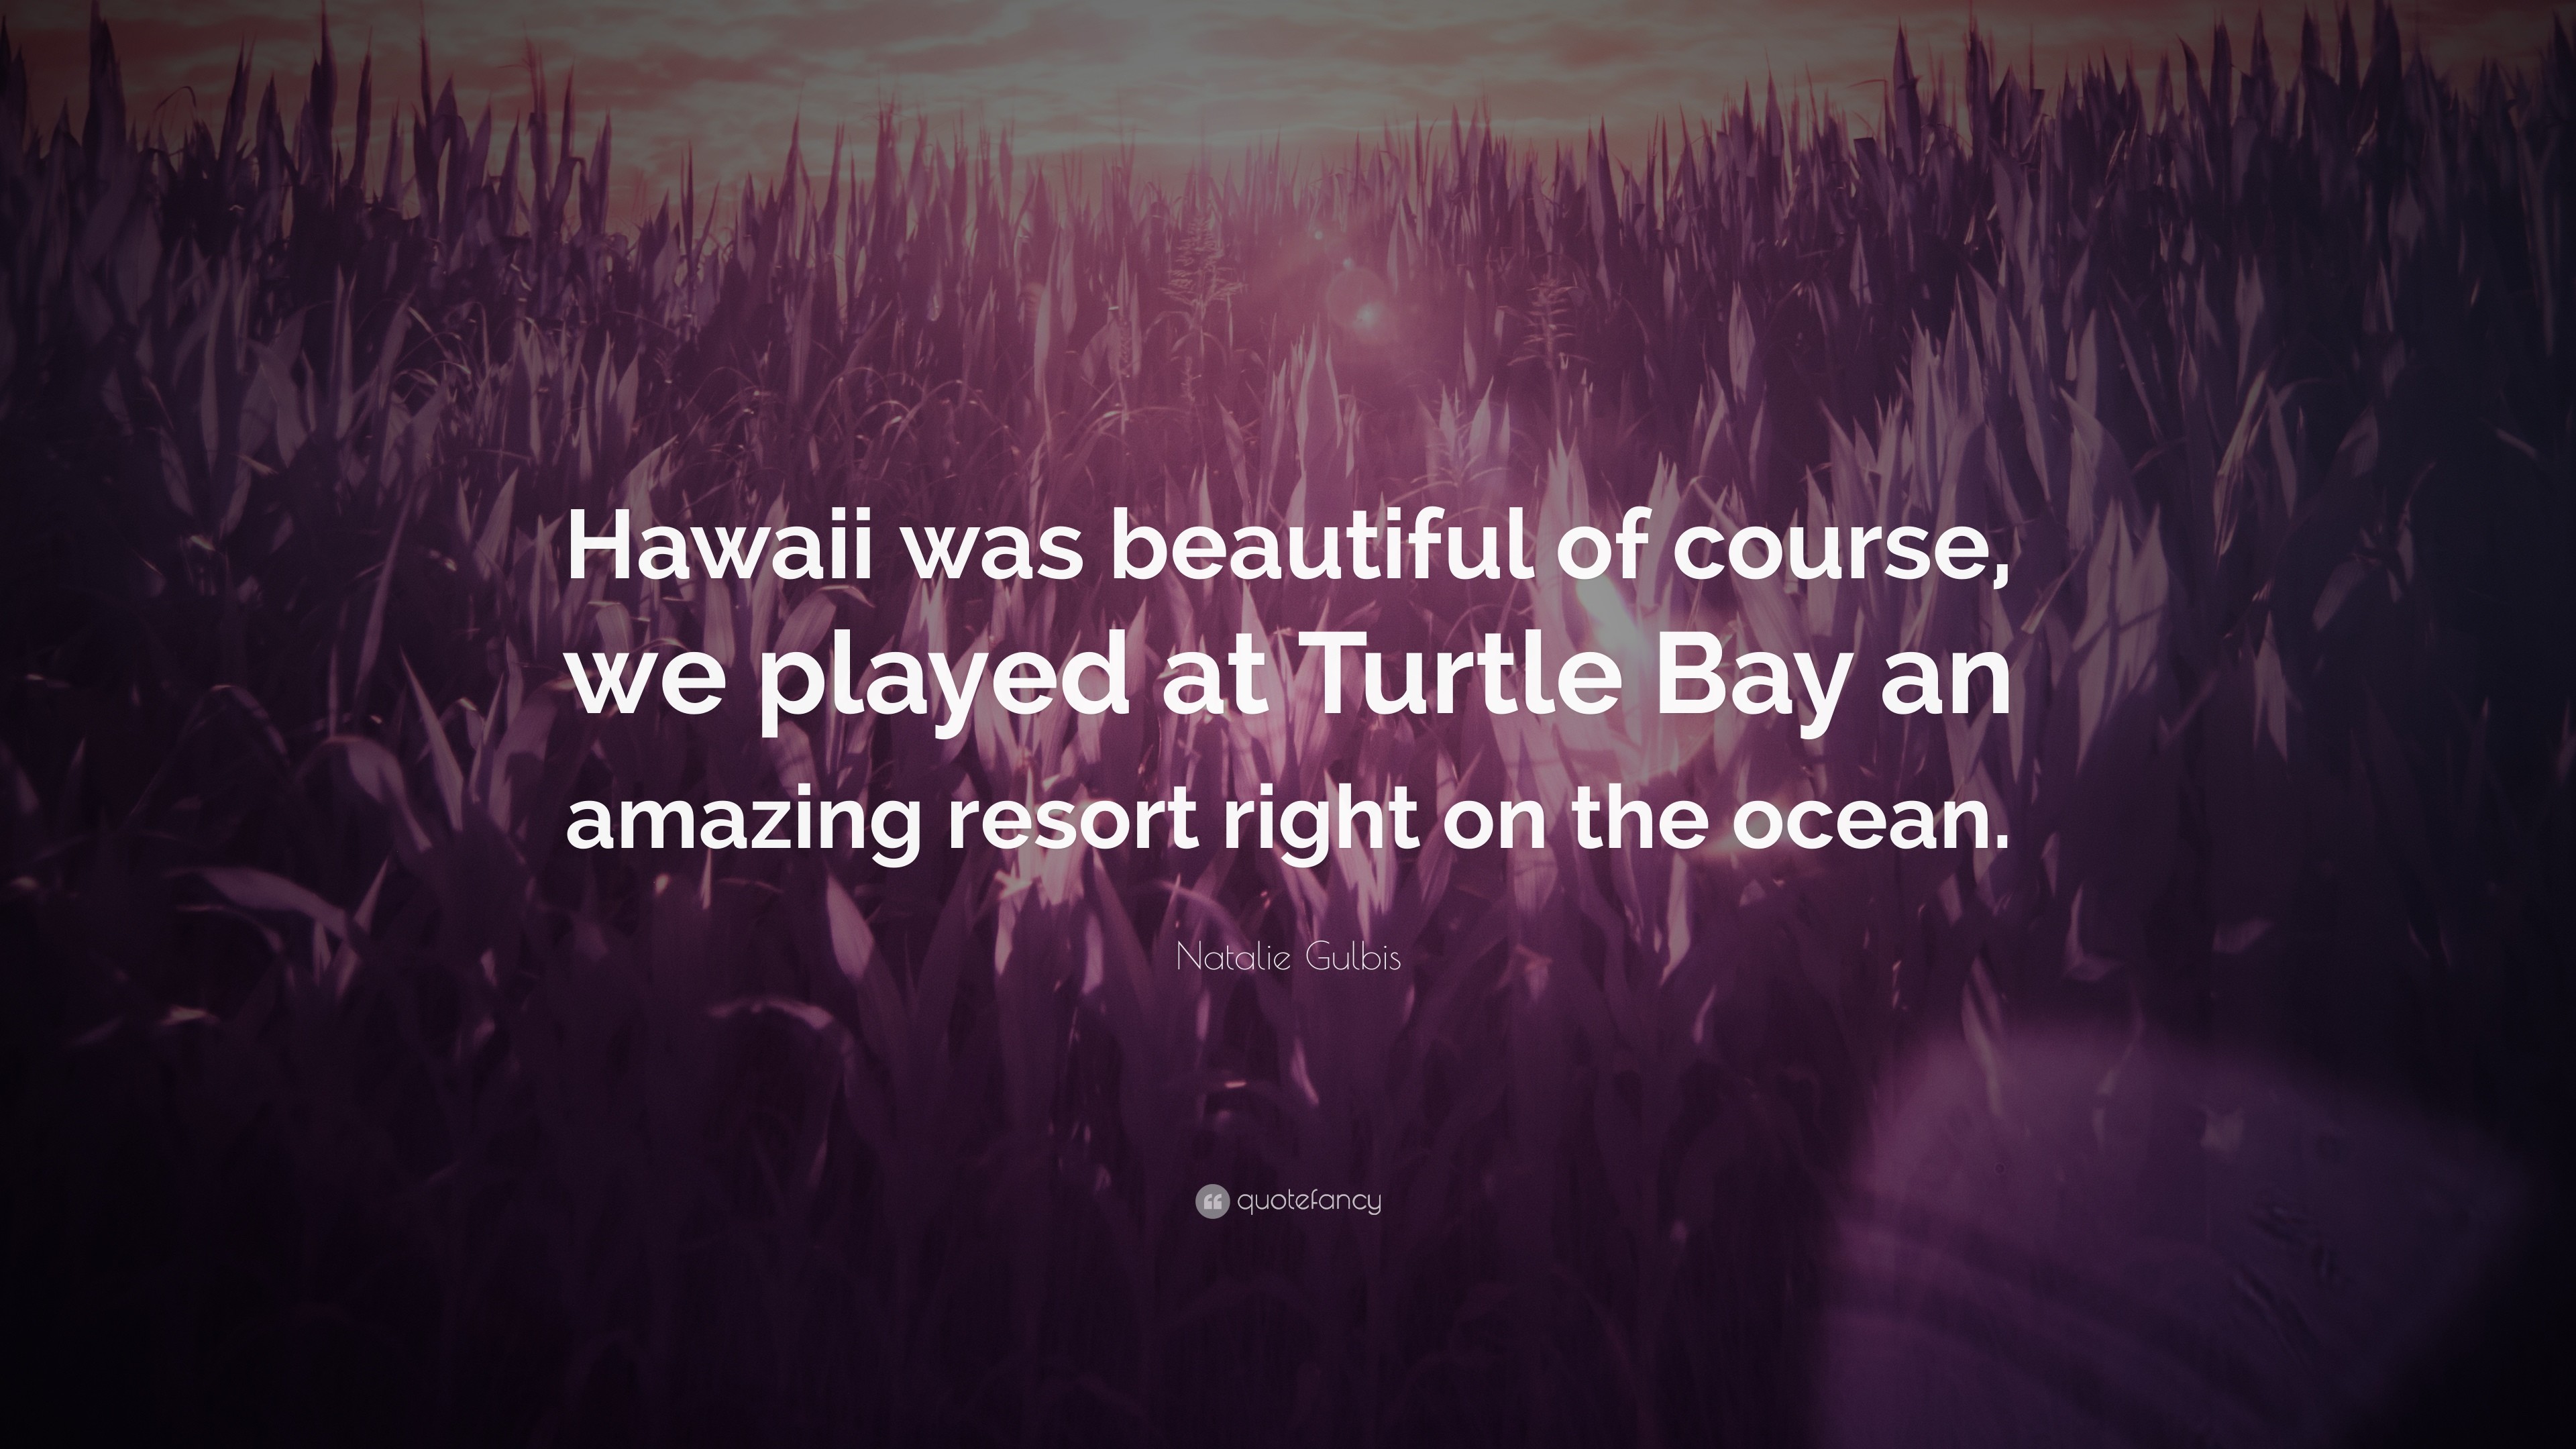 3840x2160 Natalie Gulbis Quote: “Hawaii was beautiful of course, we played at Turtle  Bay